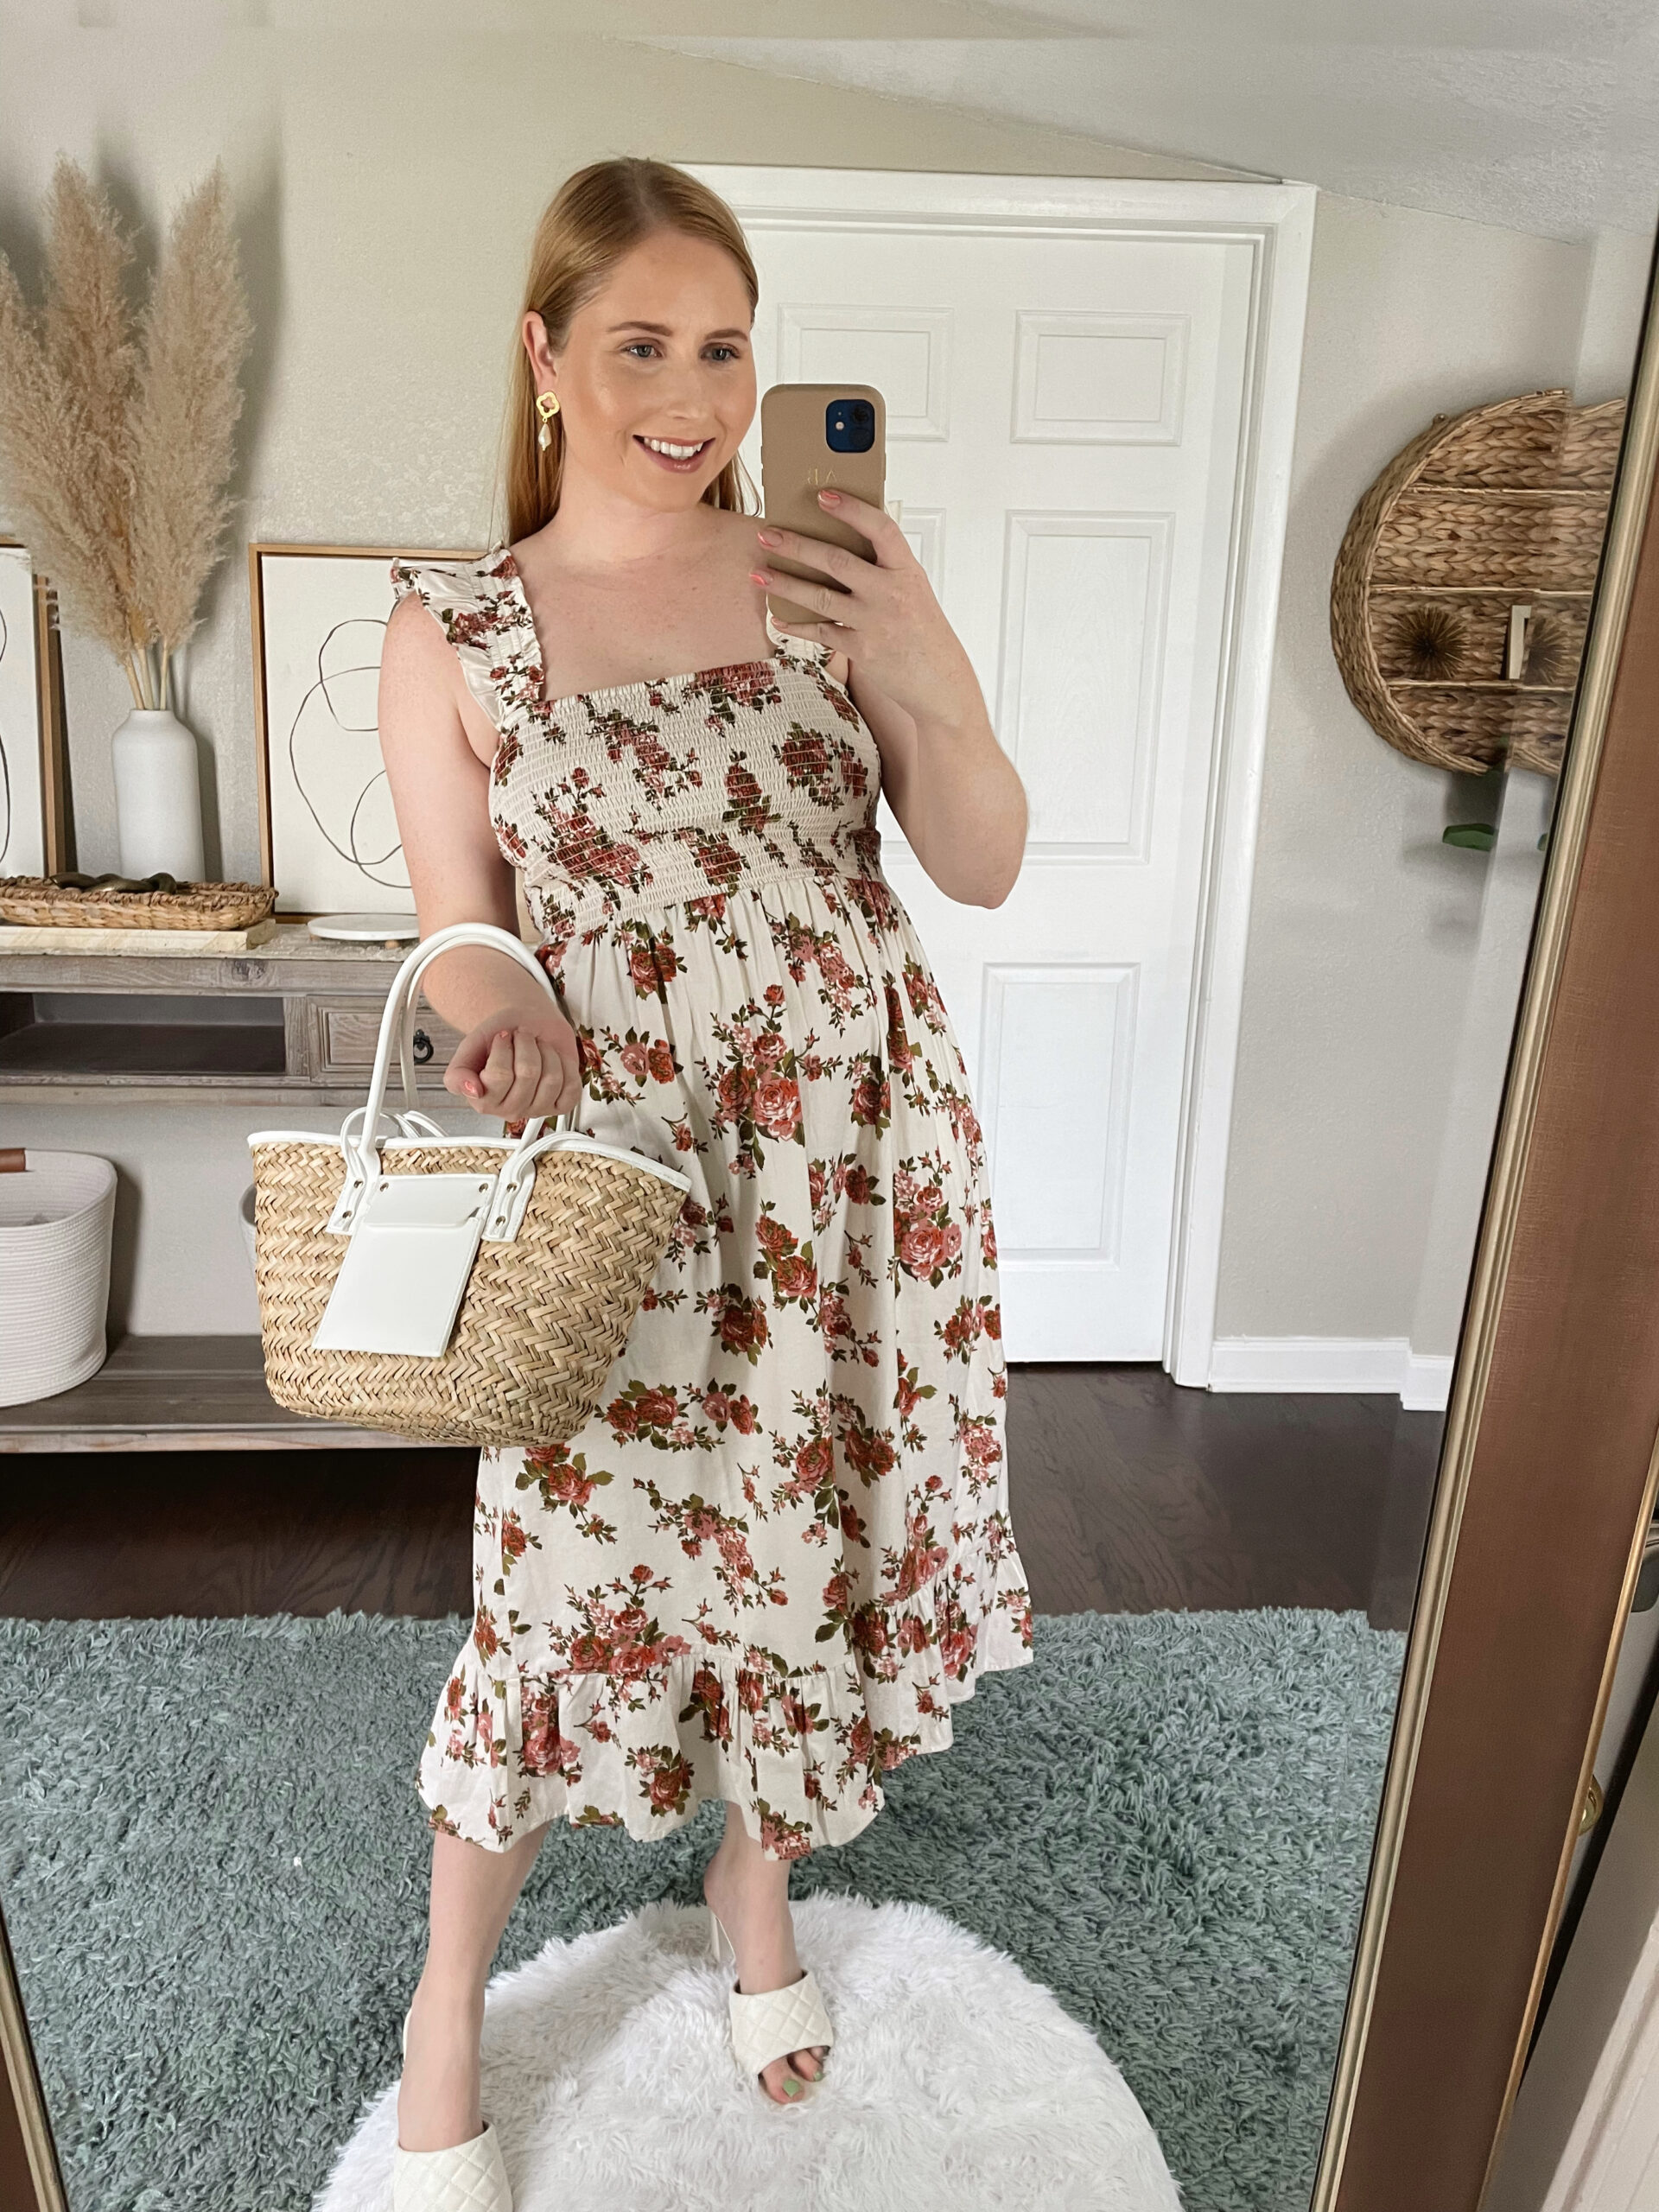 15 Summer Outfits With Sleeveless Dresses - Styleoholic